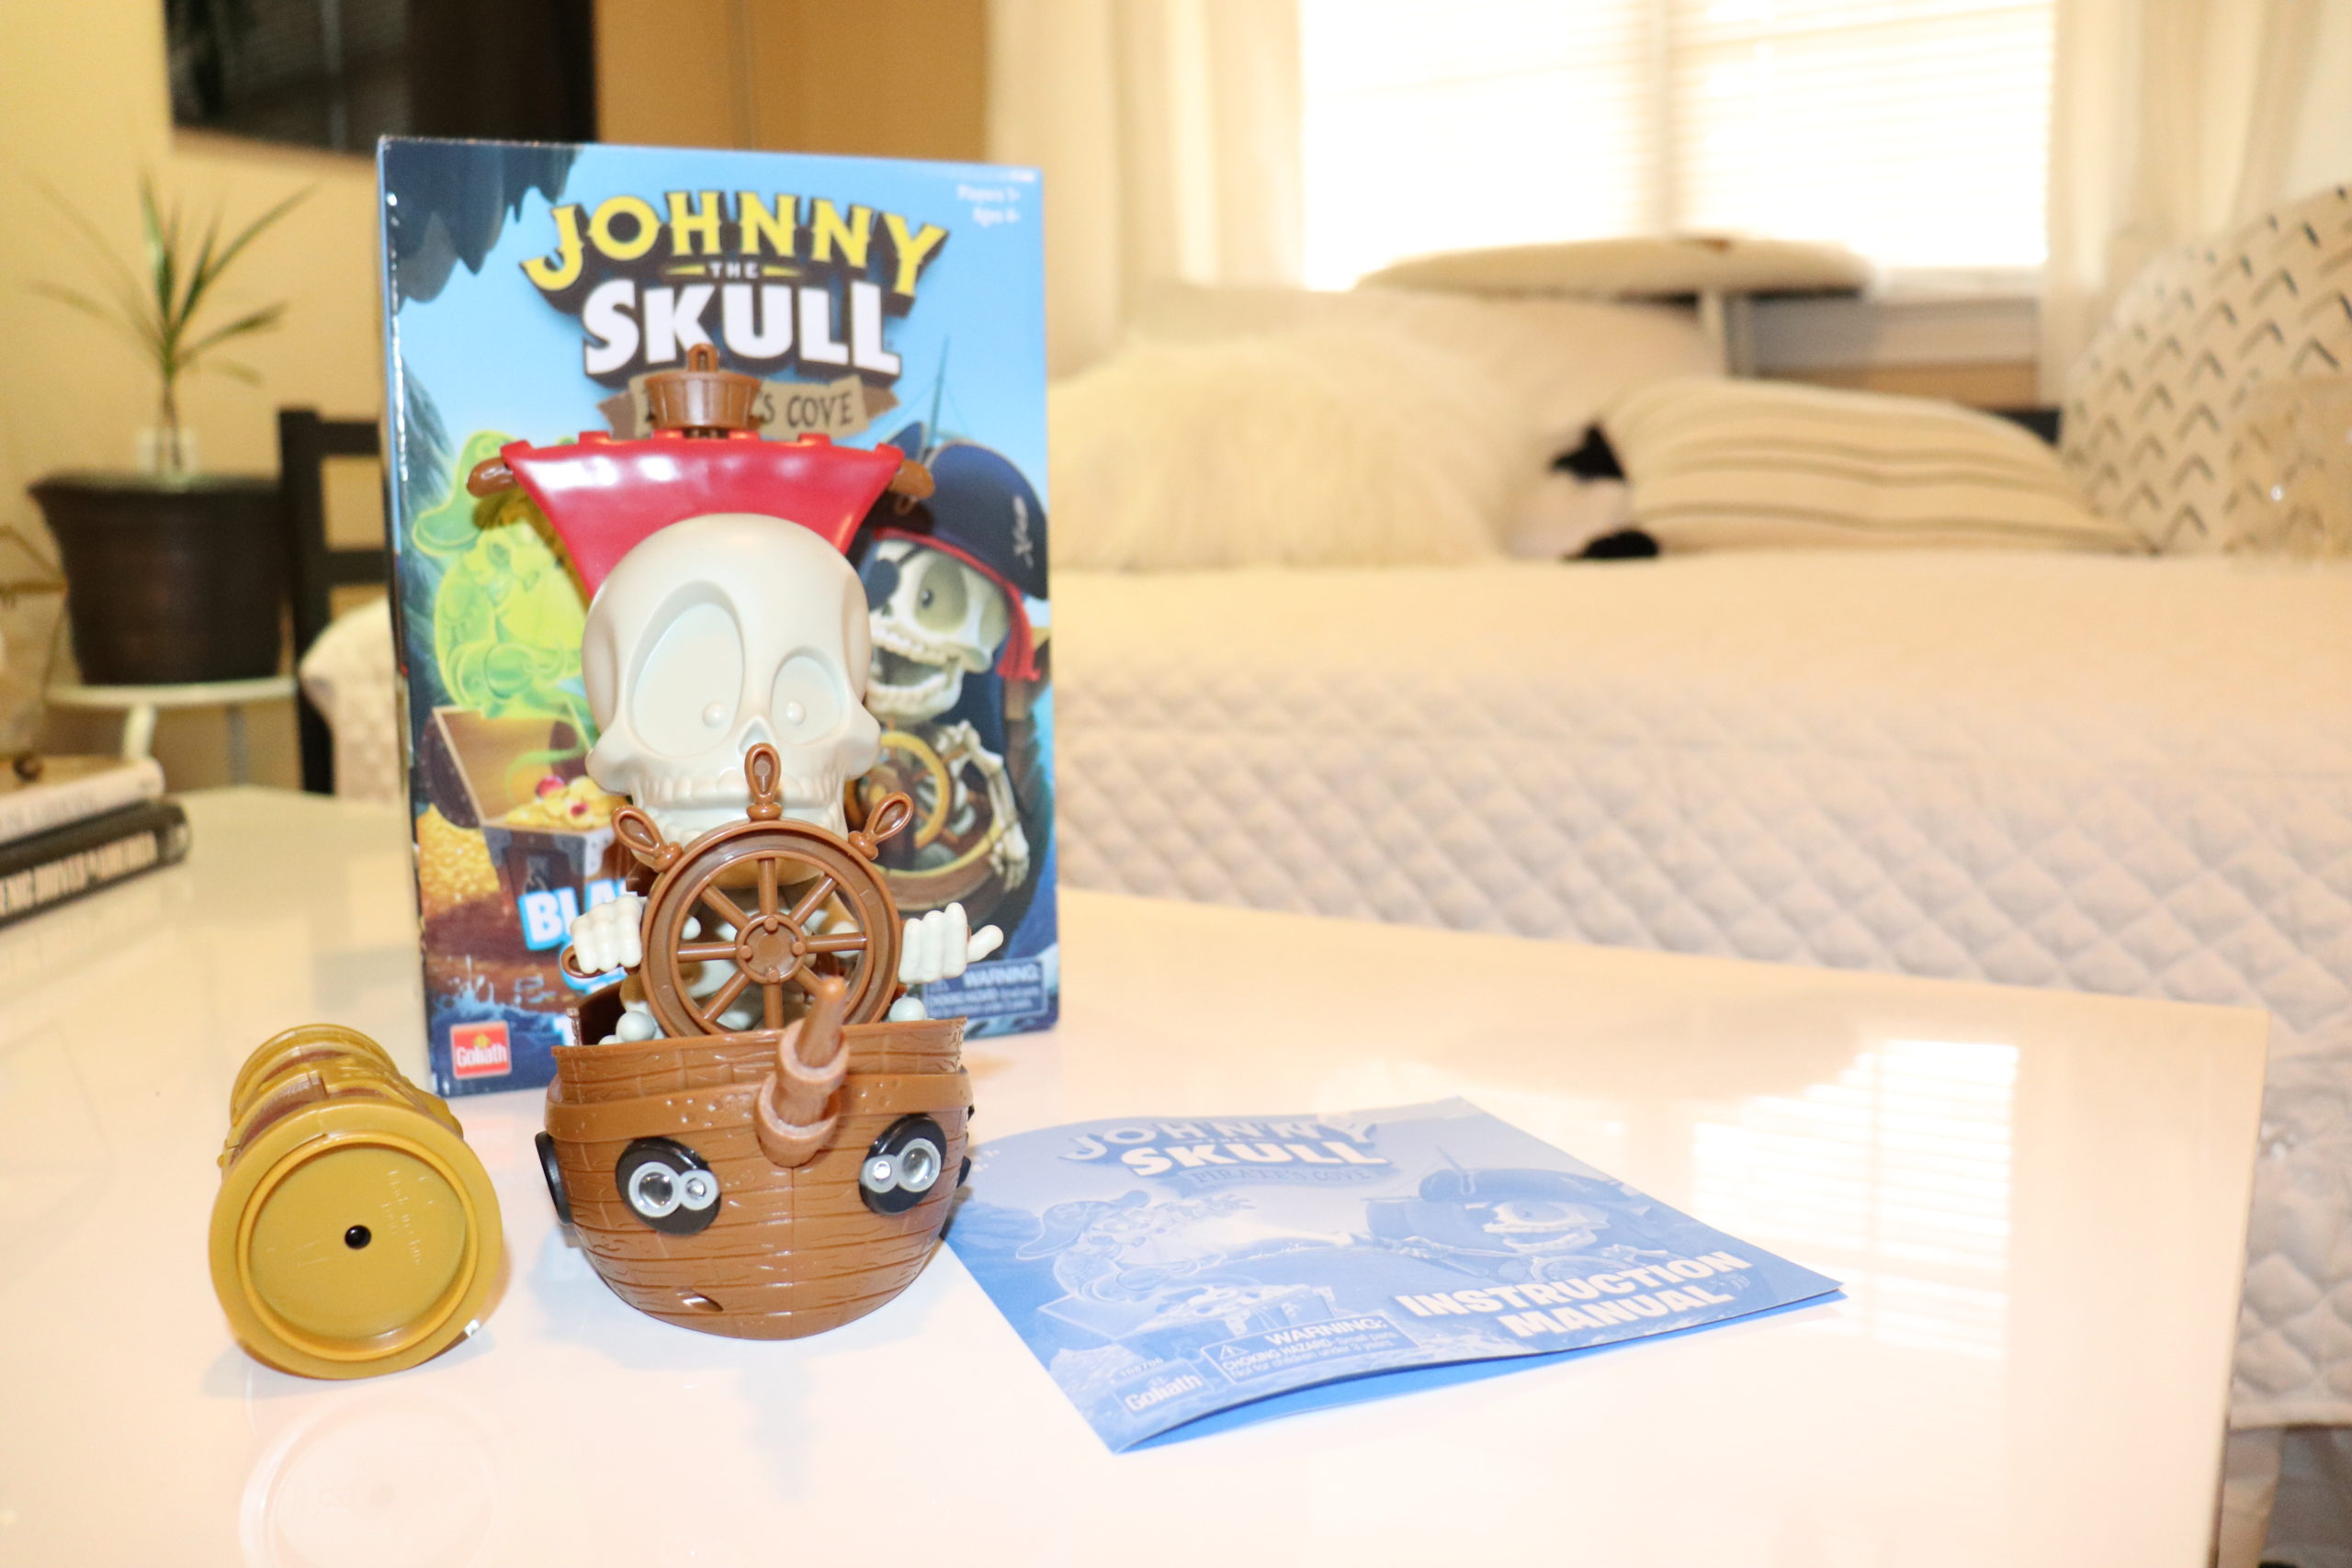 5 Will Win Johnny The Skull Pirate's Cove Game Giveaway